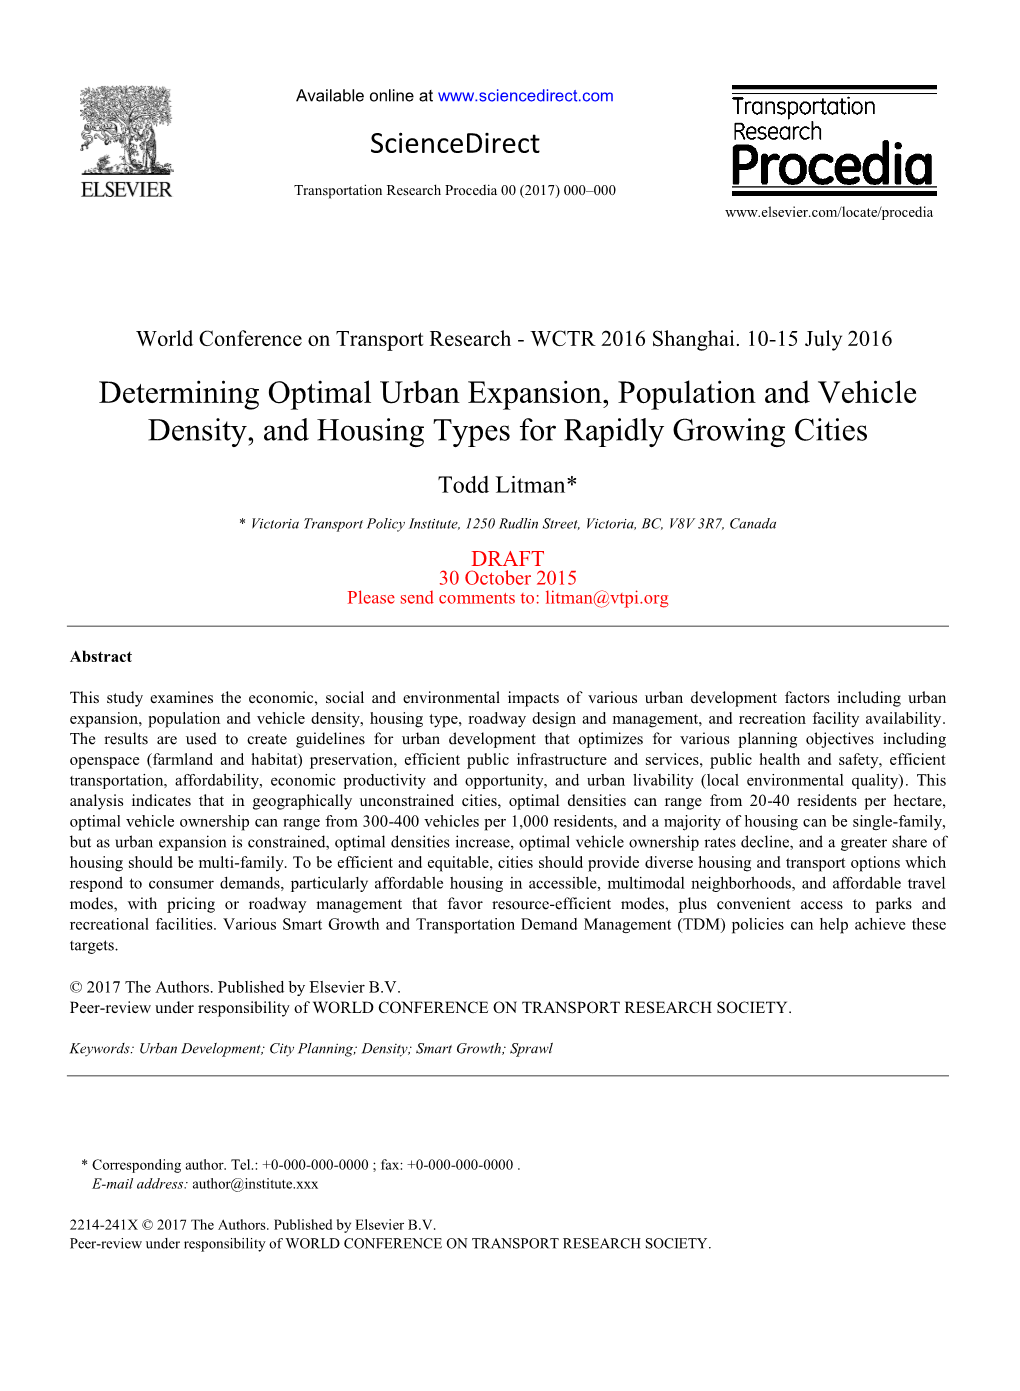 Determining Optimal Urban Expansion, Population and Vehicle Density, and Housing Types for Rapidly Growing Cities